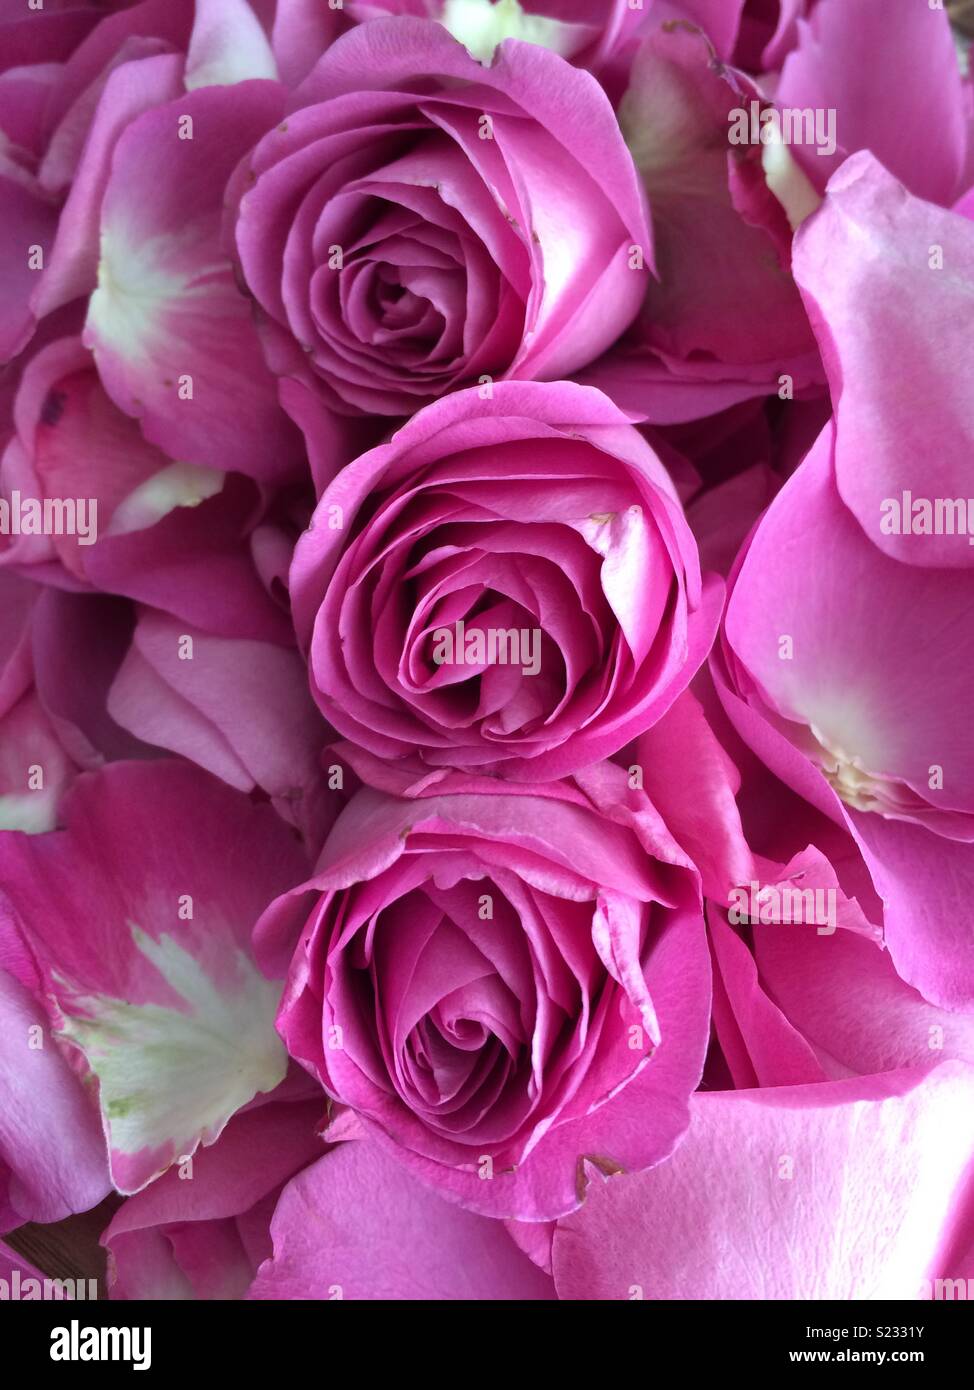 Pink roses amongst petals Stock Photo